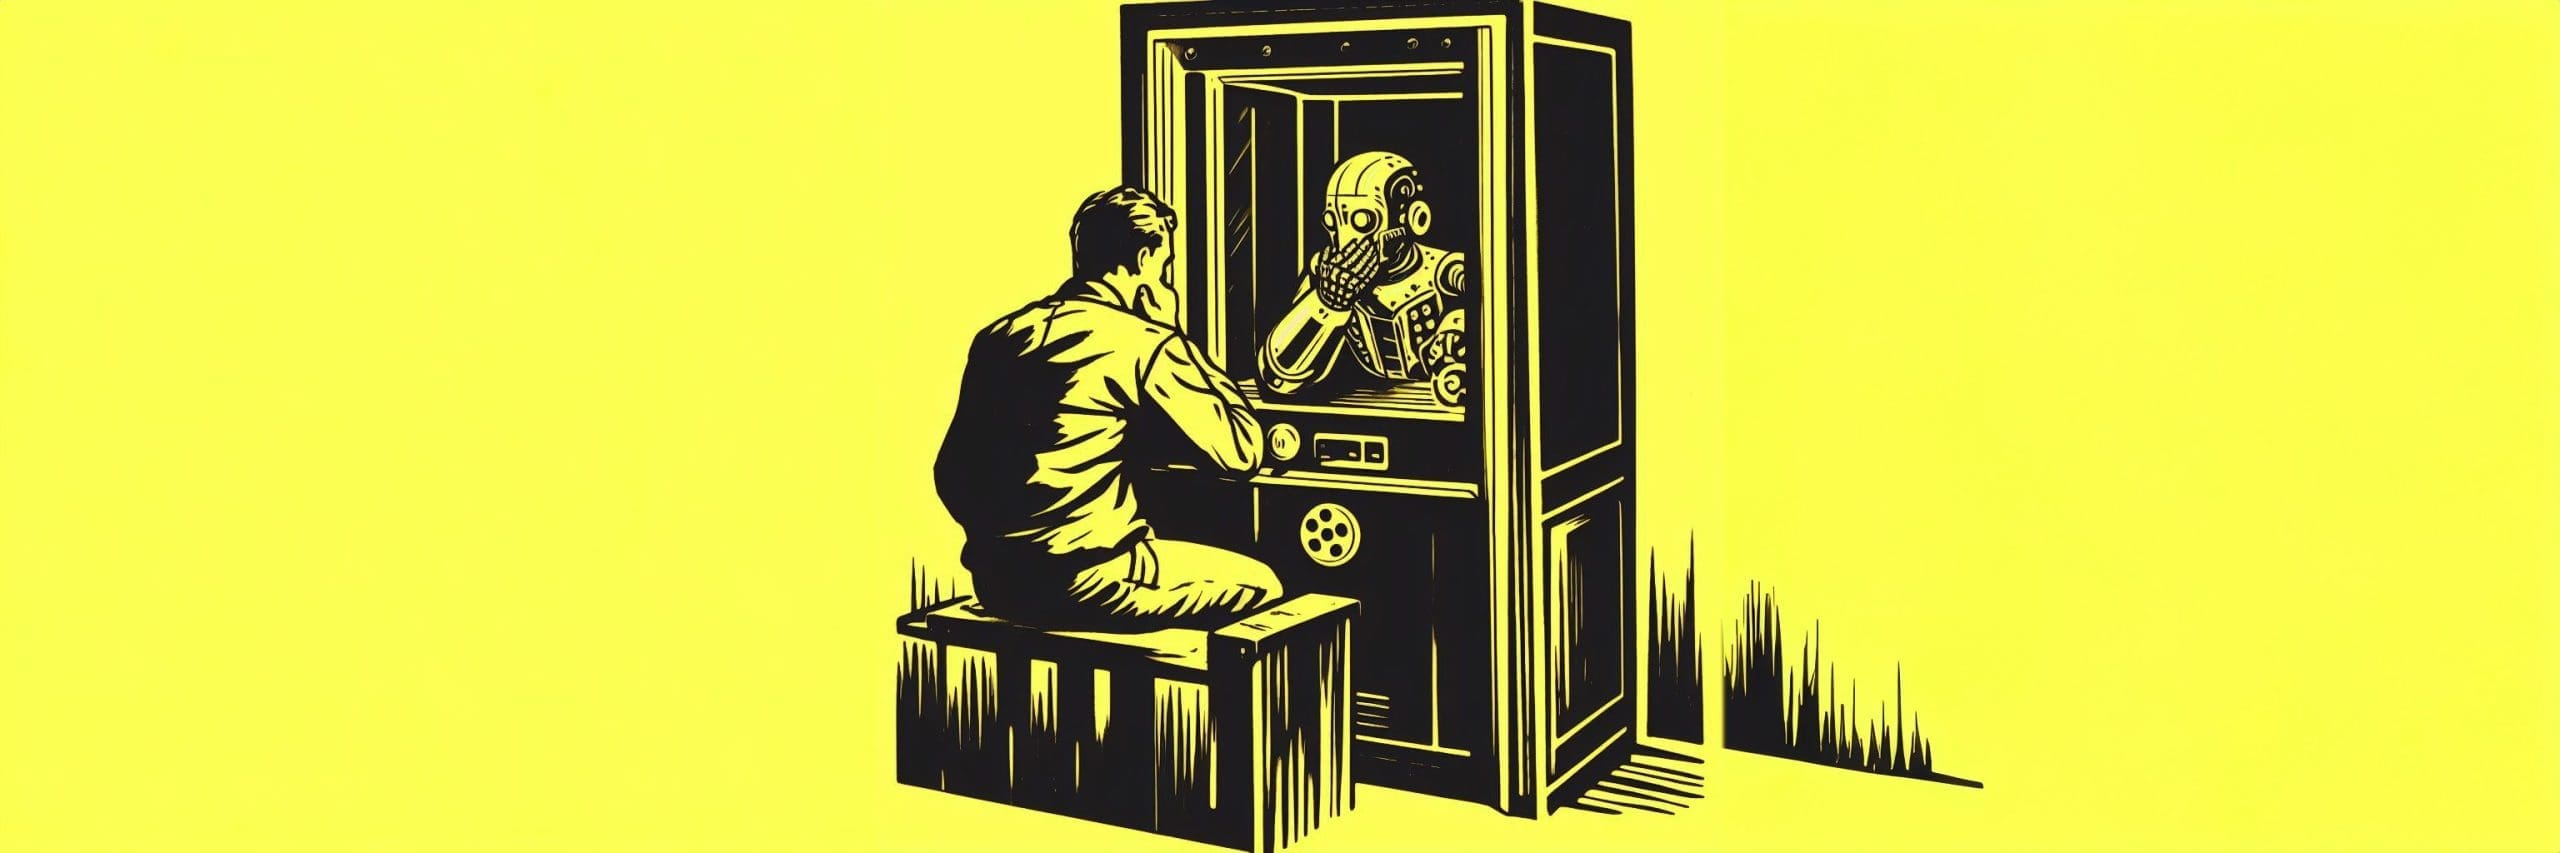 A monochromatic image dominated by a vivid yellow background showcases a stark silhouette of a man seated on a stool, attentively peering into an arcade-style booth. Inside the booth, a humanoid robot, rendered in black, mirrors the man's posture with a hand on its chin, reminiscent of Rodin's 'The Thinker.' The booth and the robot are detailed in a style that evokes the bold lines and stark contrasts of social realist propaganda art, contrasting with the minimalist, flat yellow surrounding. The scene humorously plays on the notion of work and the evolving roles between humans and technology, in a style that purposefully distances itself from the polished aesthetics commonly associated with AI imagery.